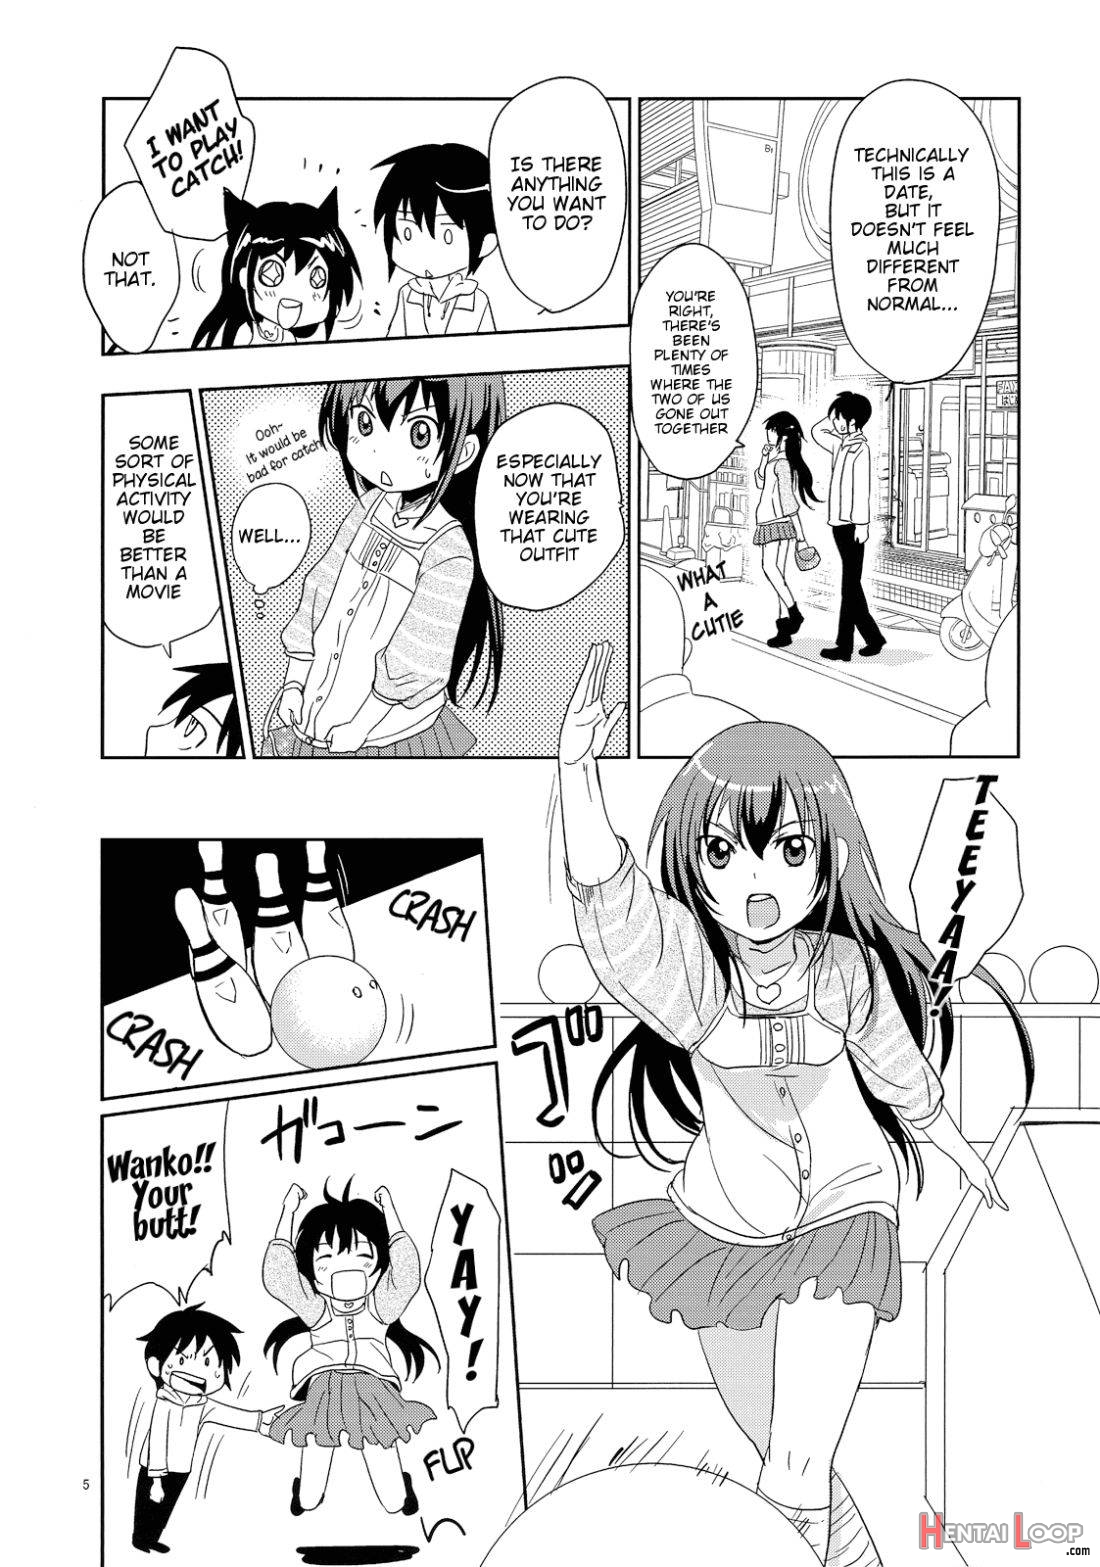 Wanko-san to Date! page 6